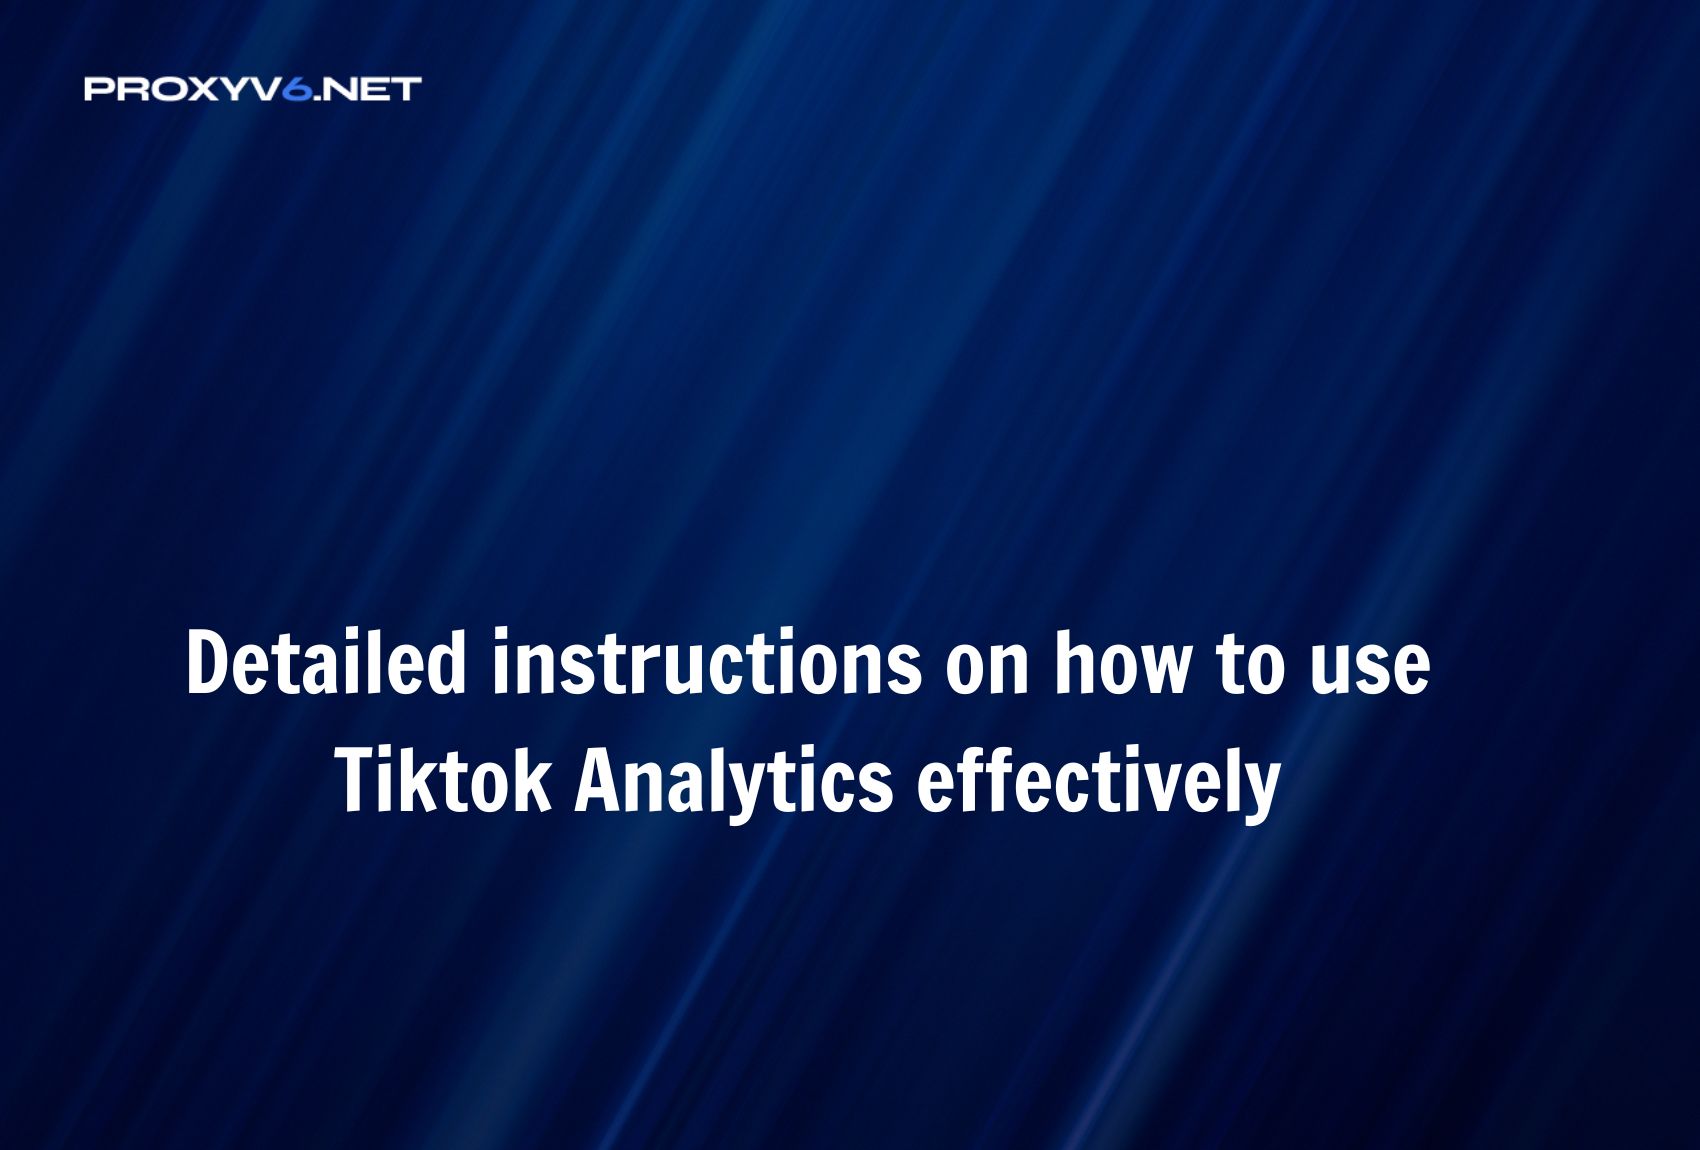 Detailed instructions on how to use Tiktok Analytics effectively